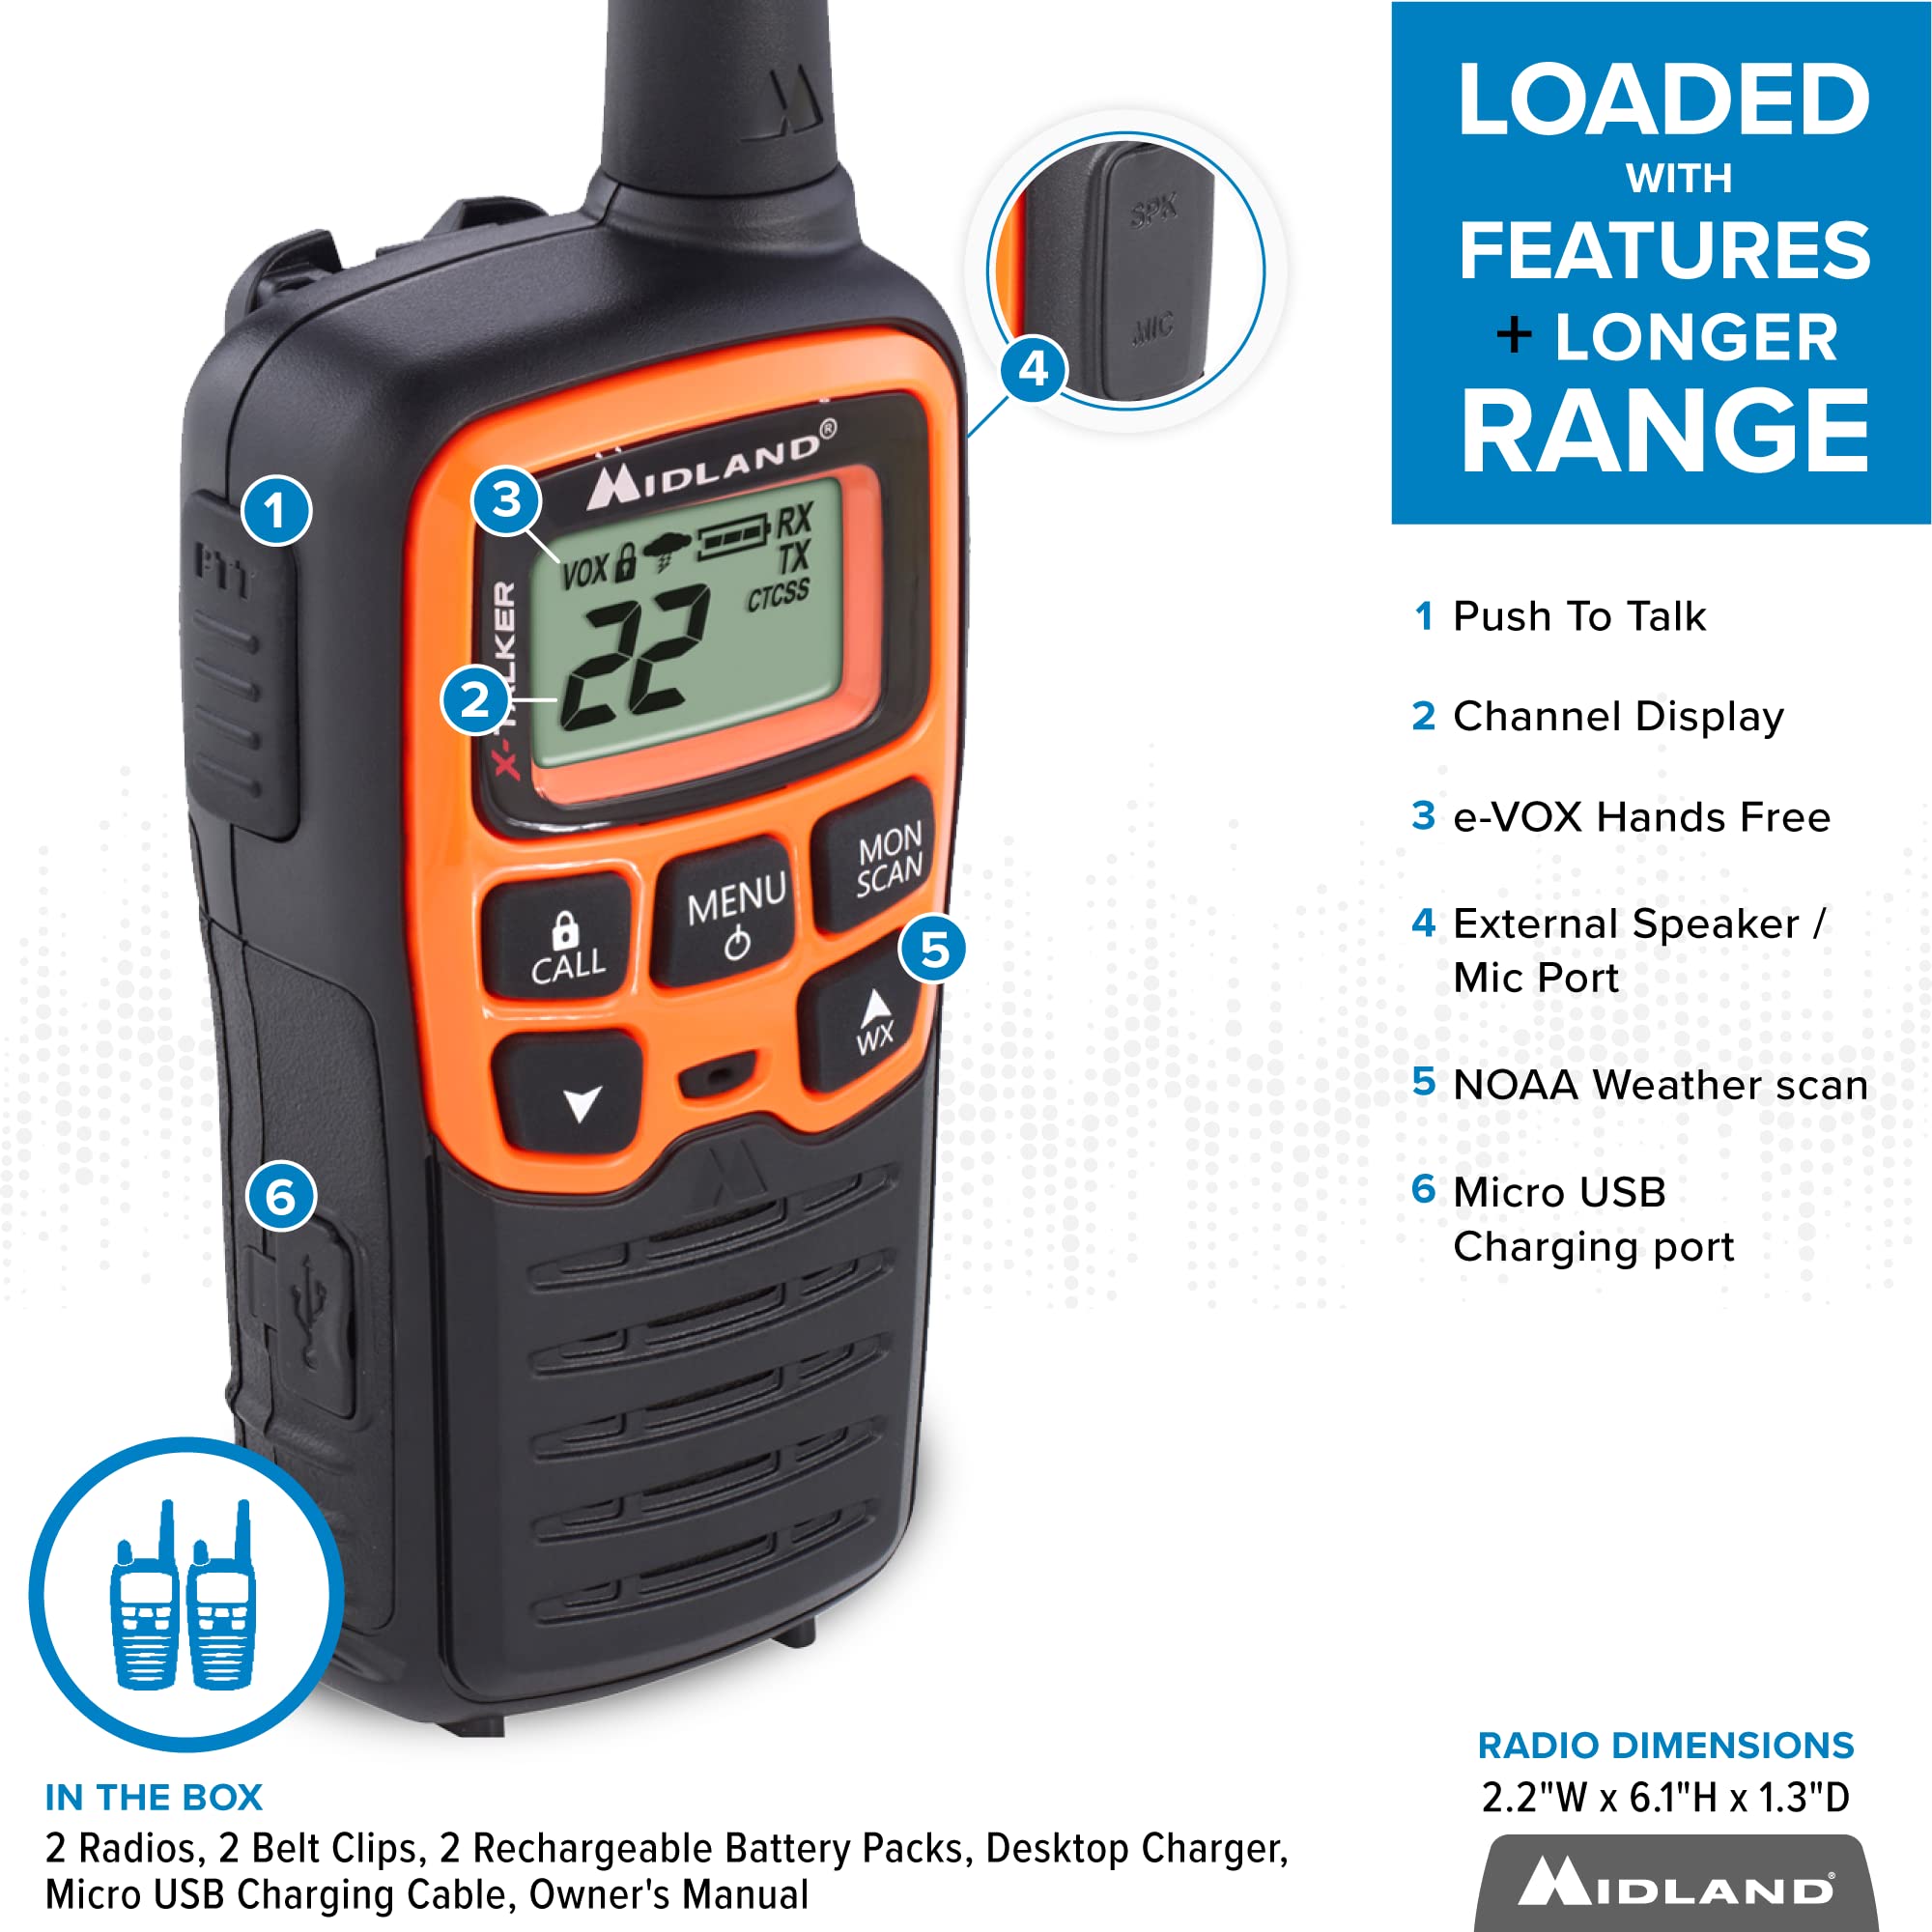 Midland- T51VP3 X-TALKER Spotting and Recovery Walkie-Talkie Long Range - FRS Two Way Radio for kids Caravanning with NOAA Weather Scan + Alert, 38 Privacy Codes - Black/Orange - 2 Pack of Radios